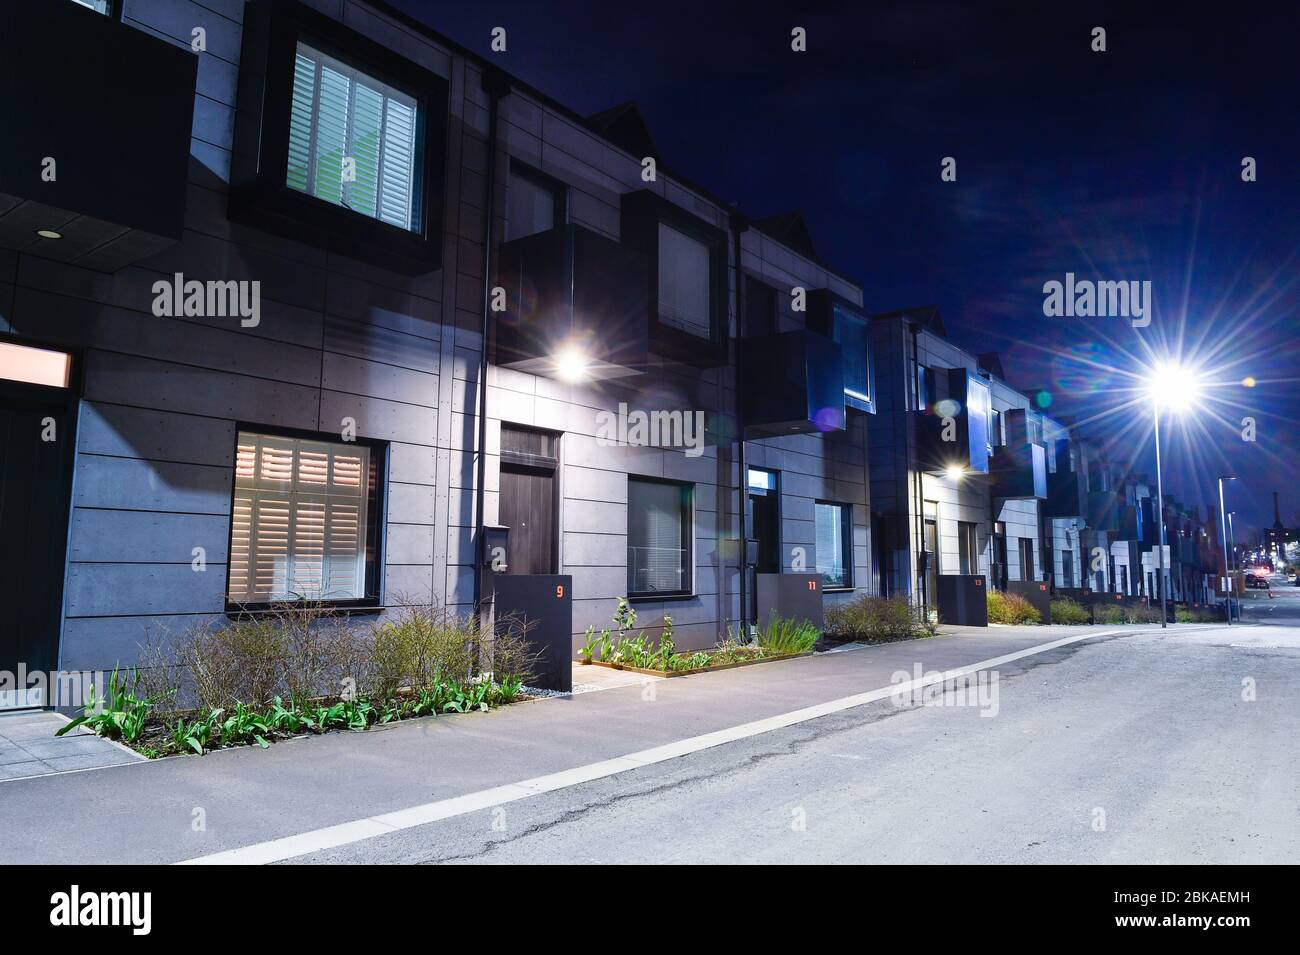 A view of housing on the Cottonfield Wharf Estate, Ancoats, Manchester. Stock Photo